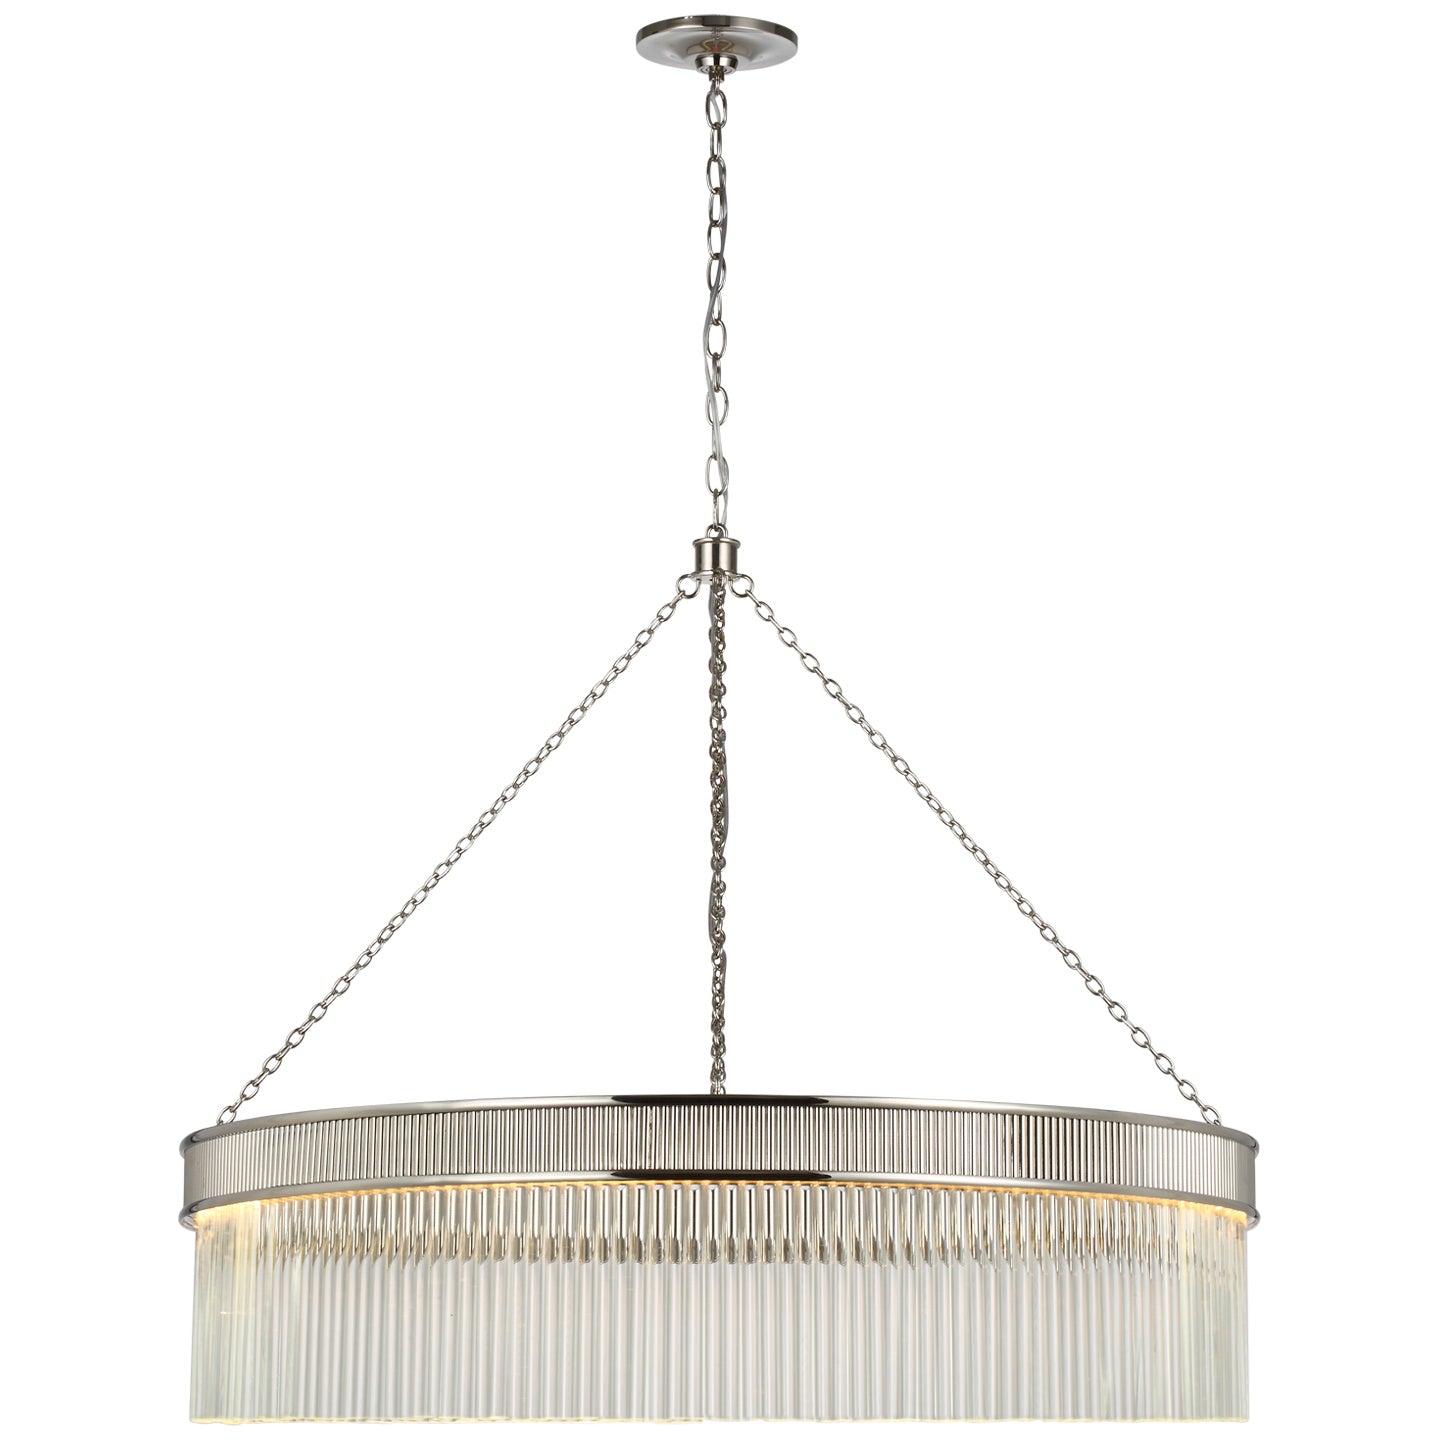 Load image into Gallery viewer, Visual Comfort Signature - S 5172PN-CG - LED Chandelier - Menil - Polished Nickel
